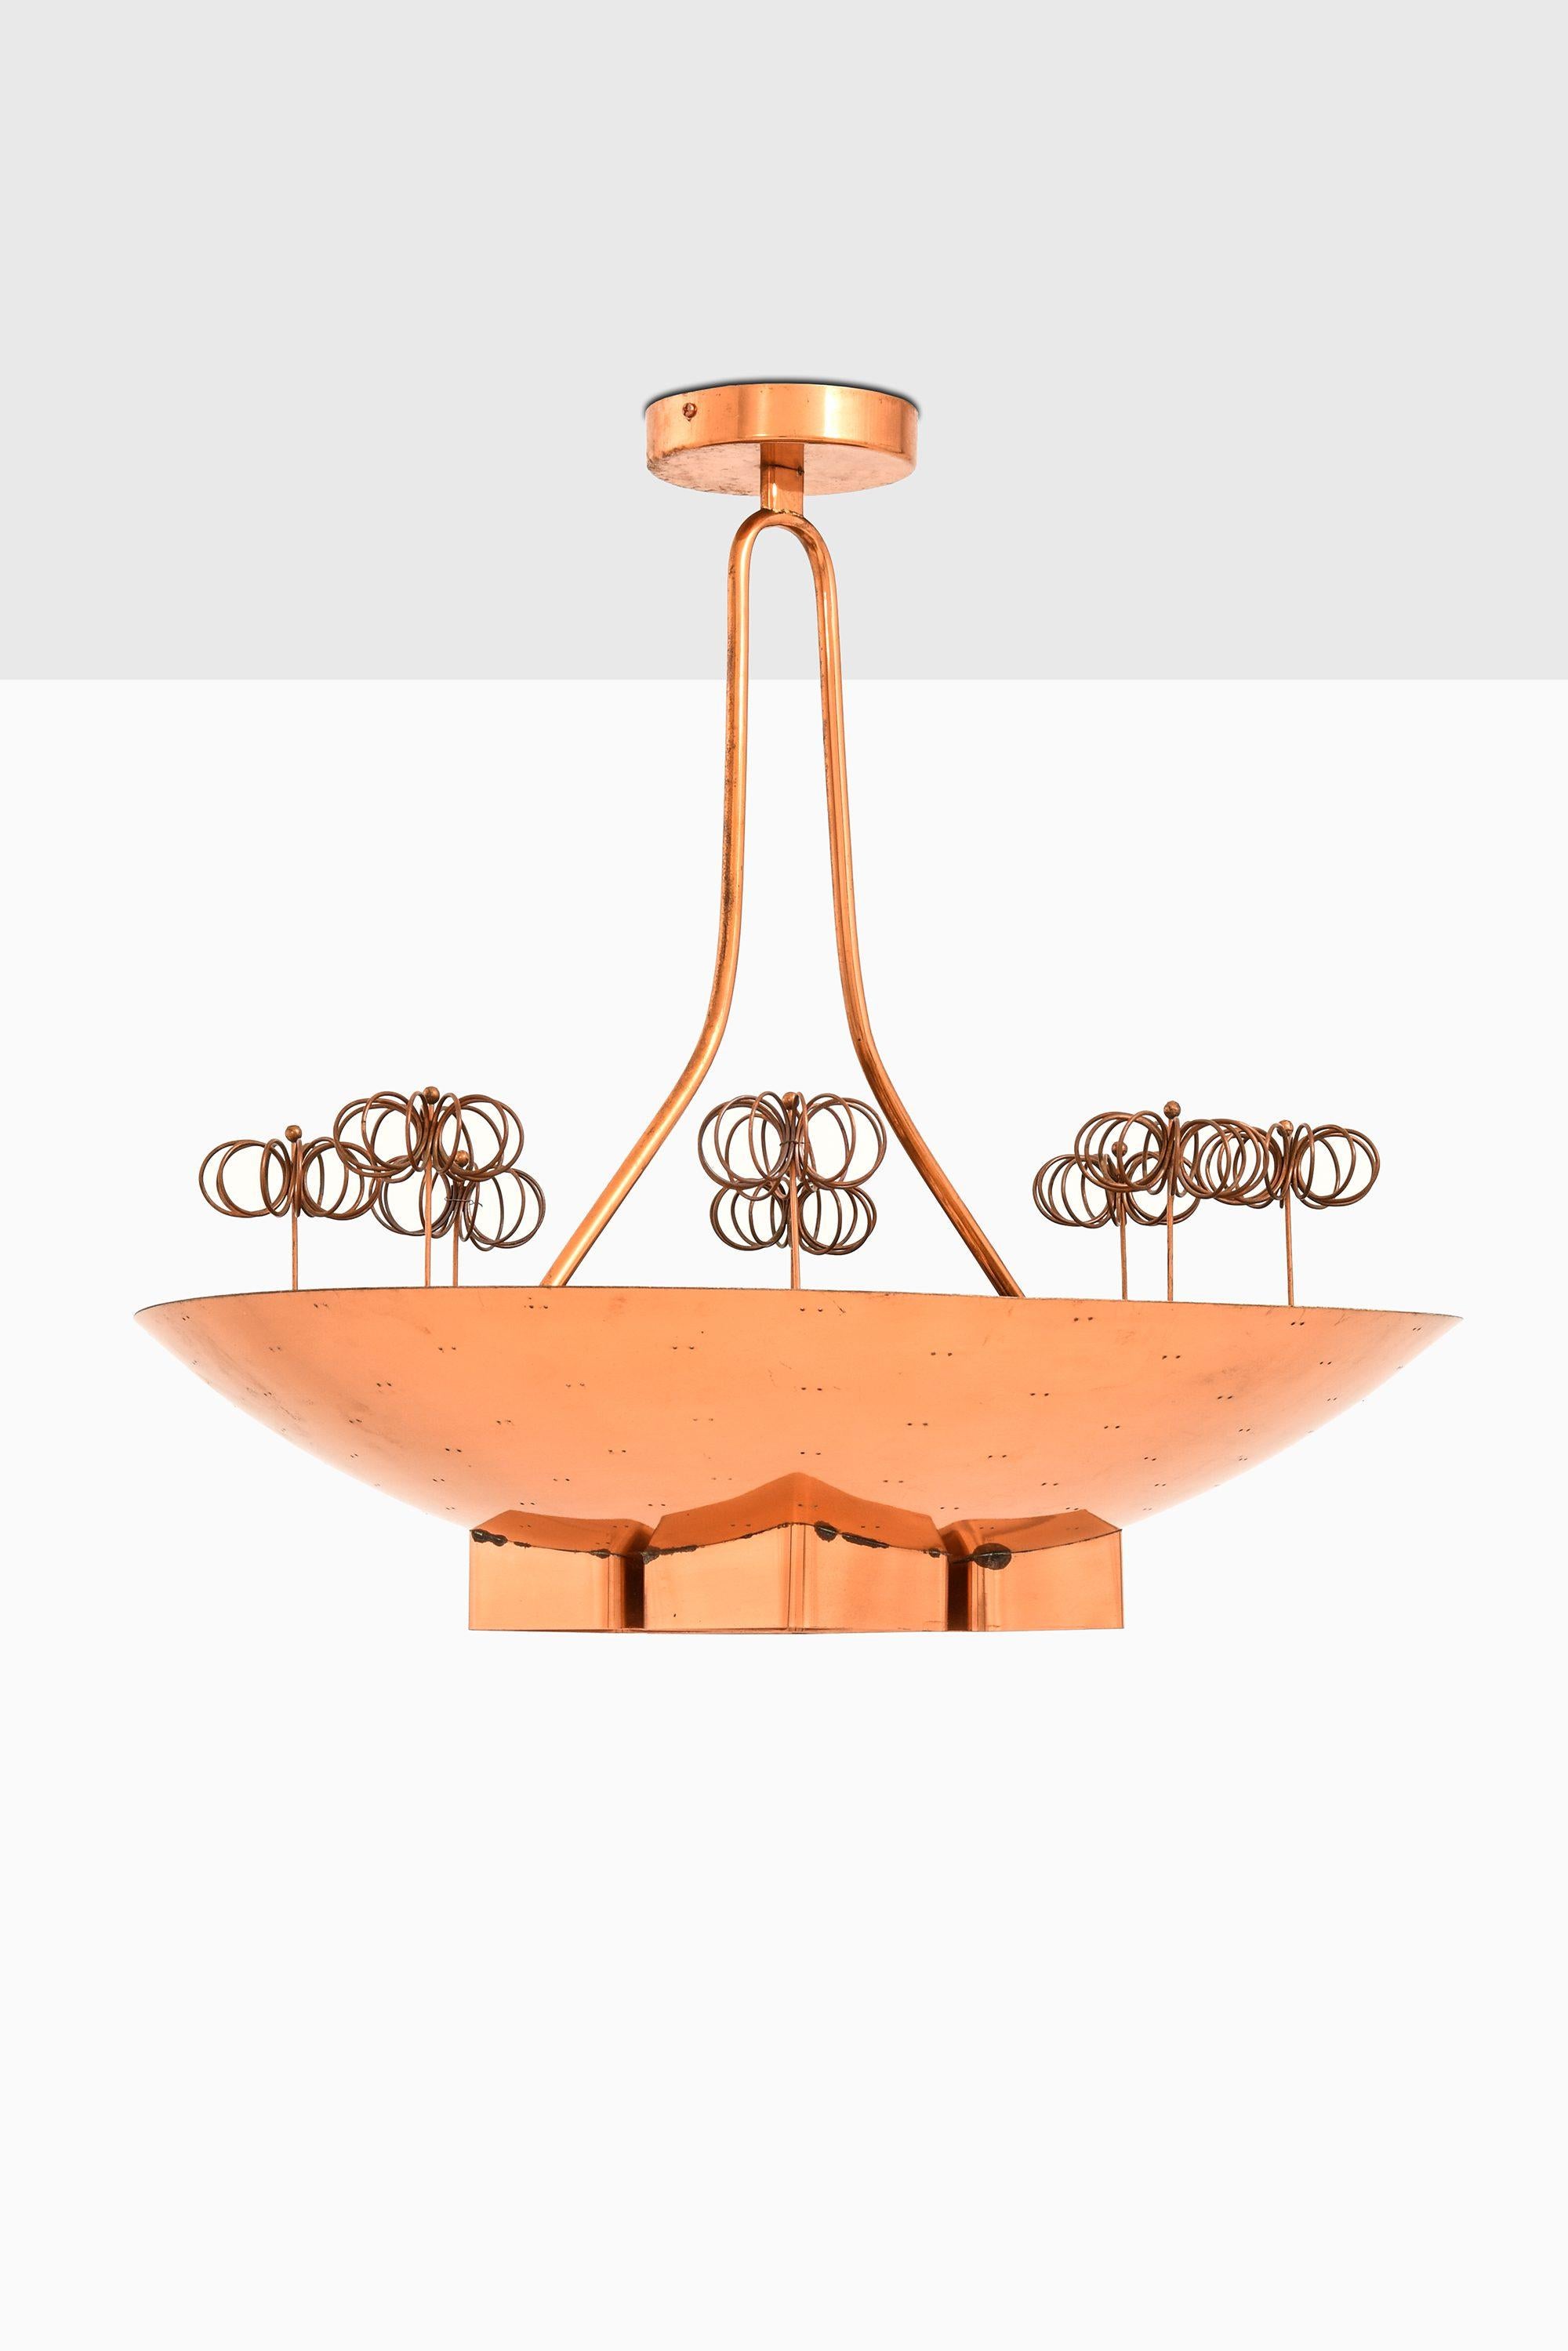 Custom Ordered Ceiling Lamp in Copper & Brass by Paavo Tynell, 1940's

Additional Information:
Material: Copper and brass
Style: Mid century, Scandinavian
Produced by Taito Oy in Finland
Dimensions (W x D x H): 60 x 60 x 60 cm
Condition: Good